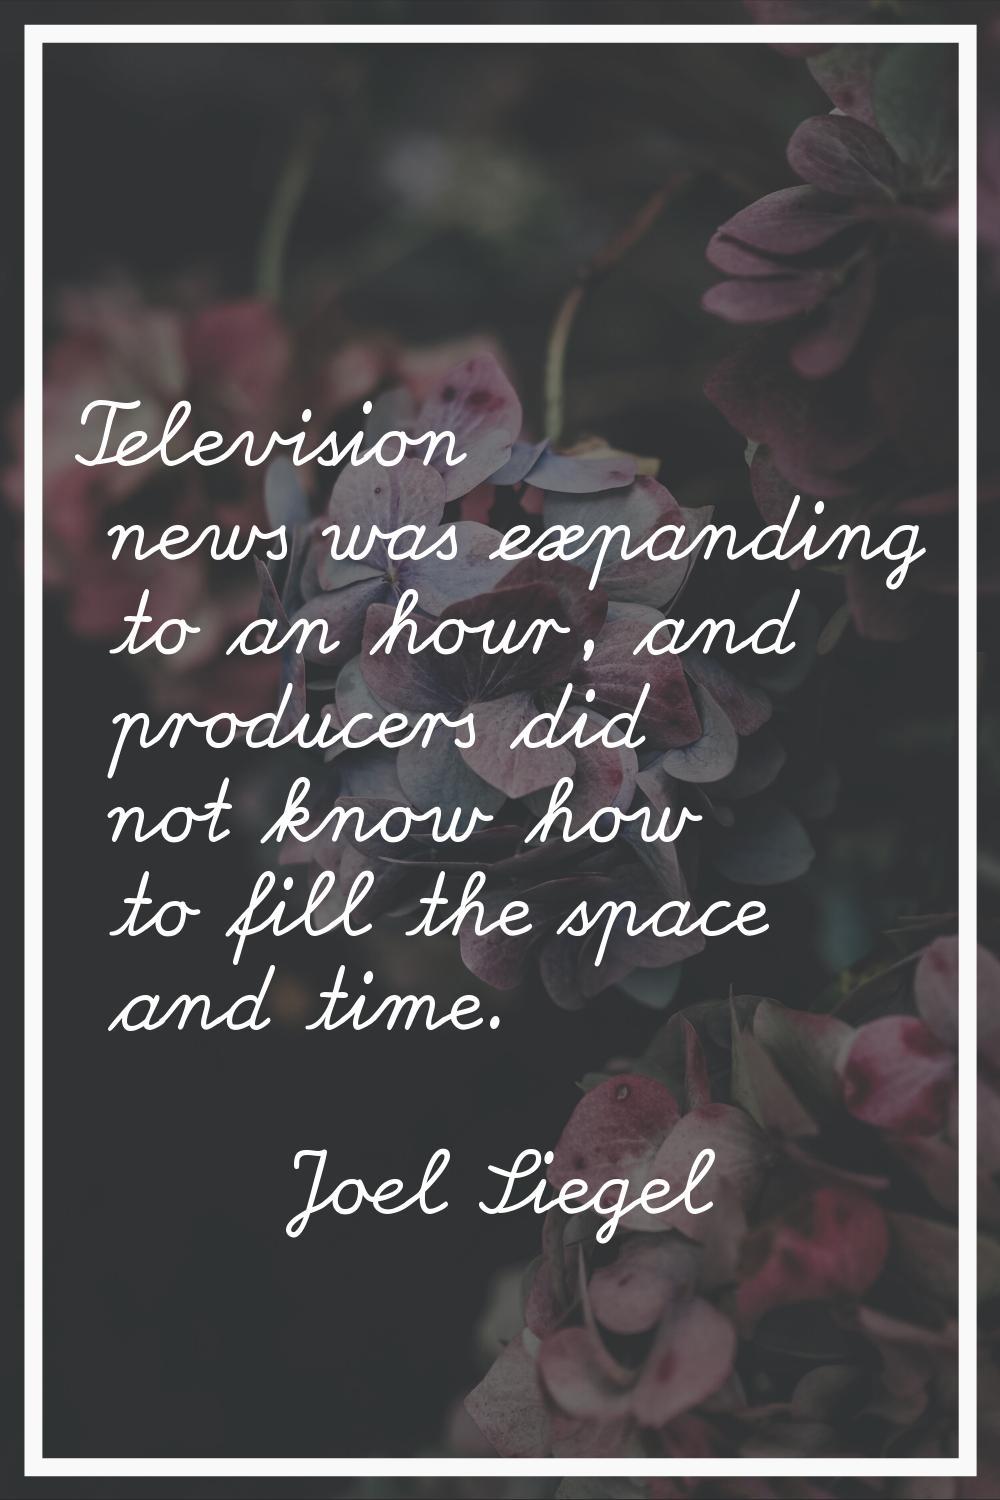 Television news was expanding to an hour, and producers did not know how to fill the space and time